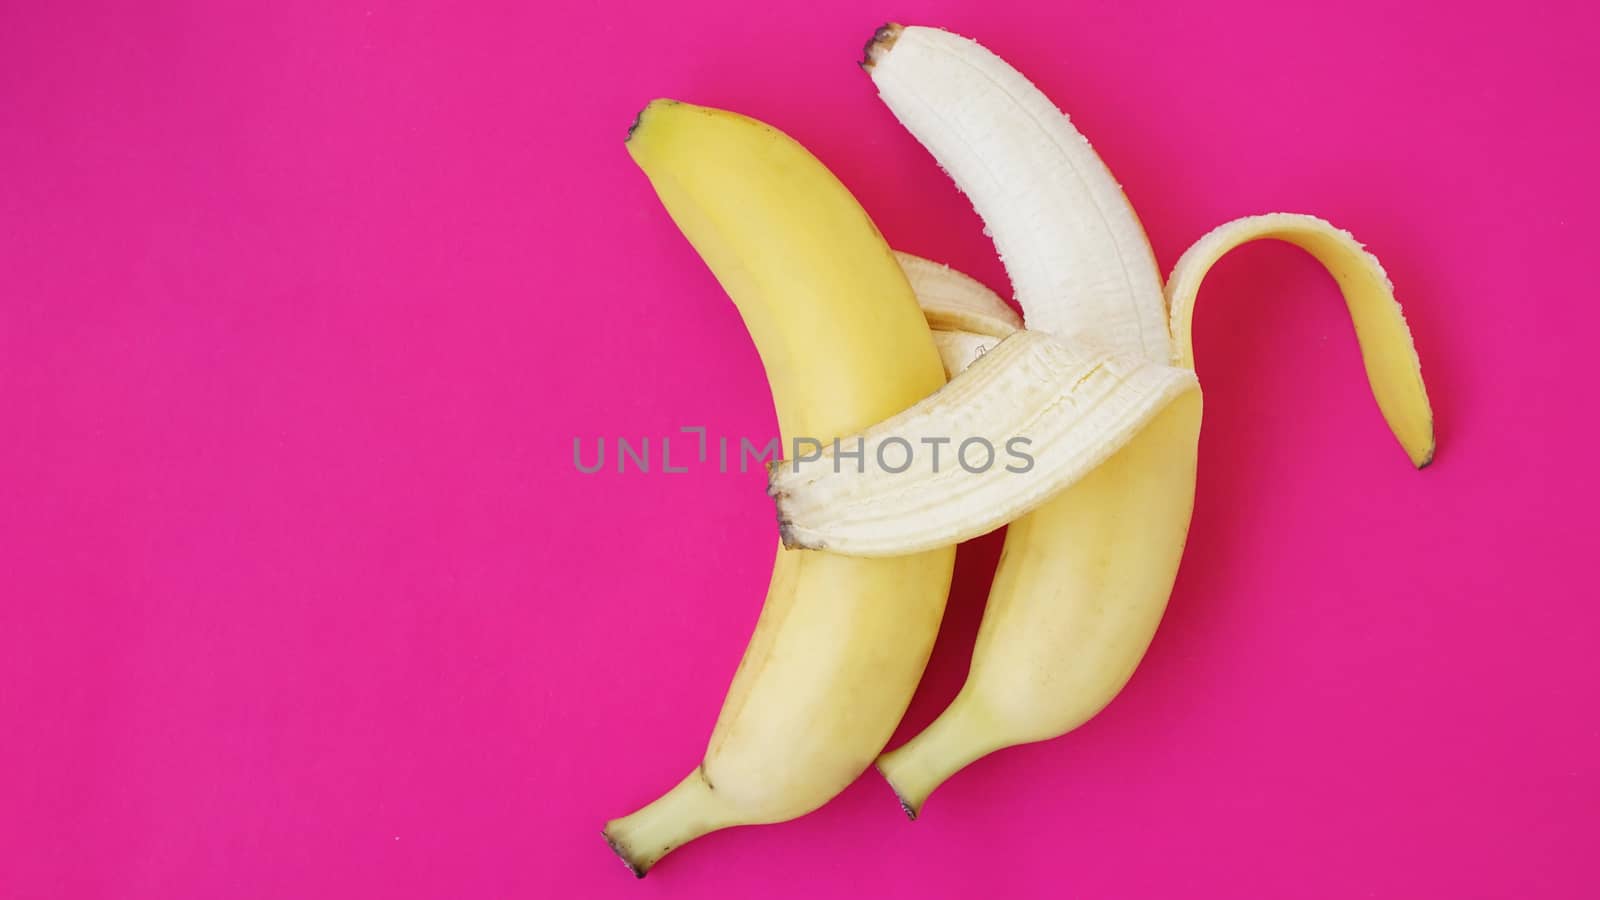 The concept of a friendly couple. Banana like a husband embraces another one like a wife. Gay couple idea. Solid pink background.